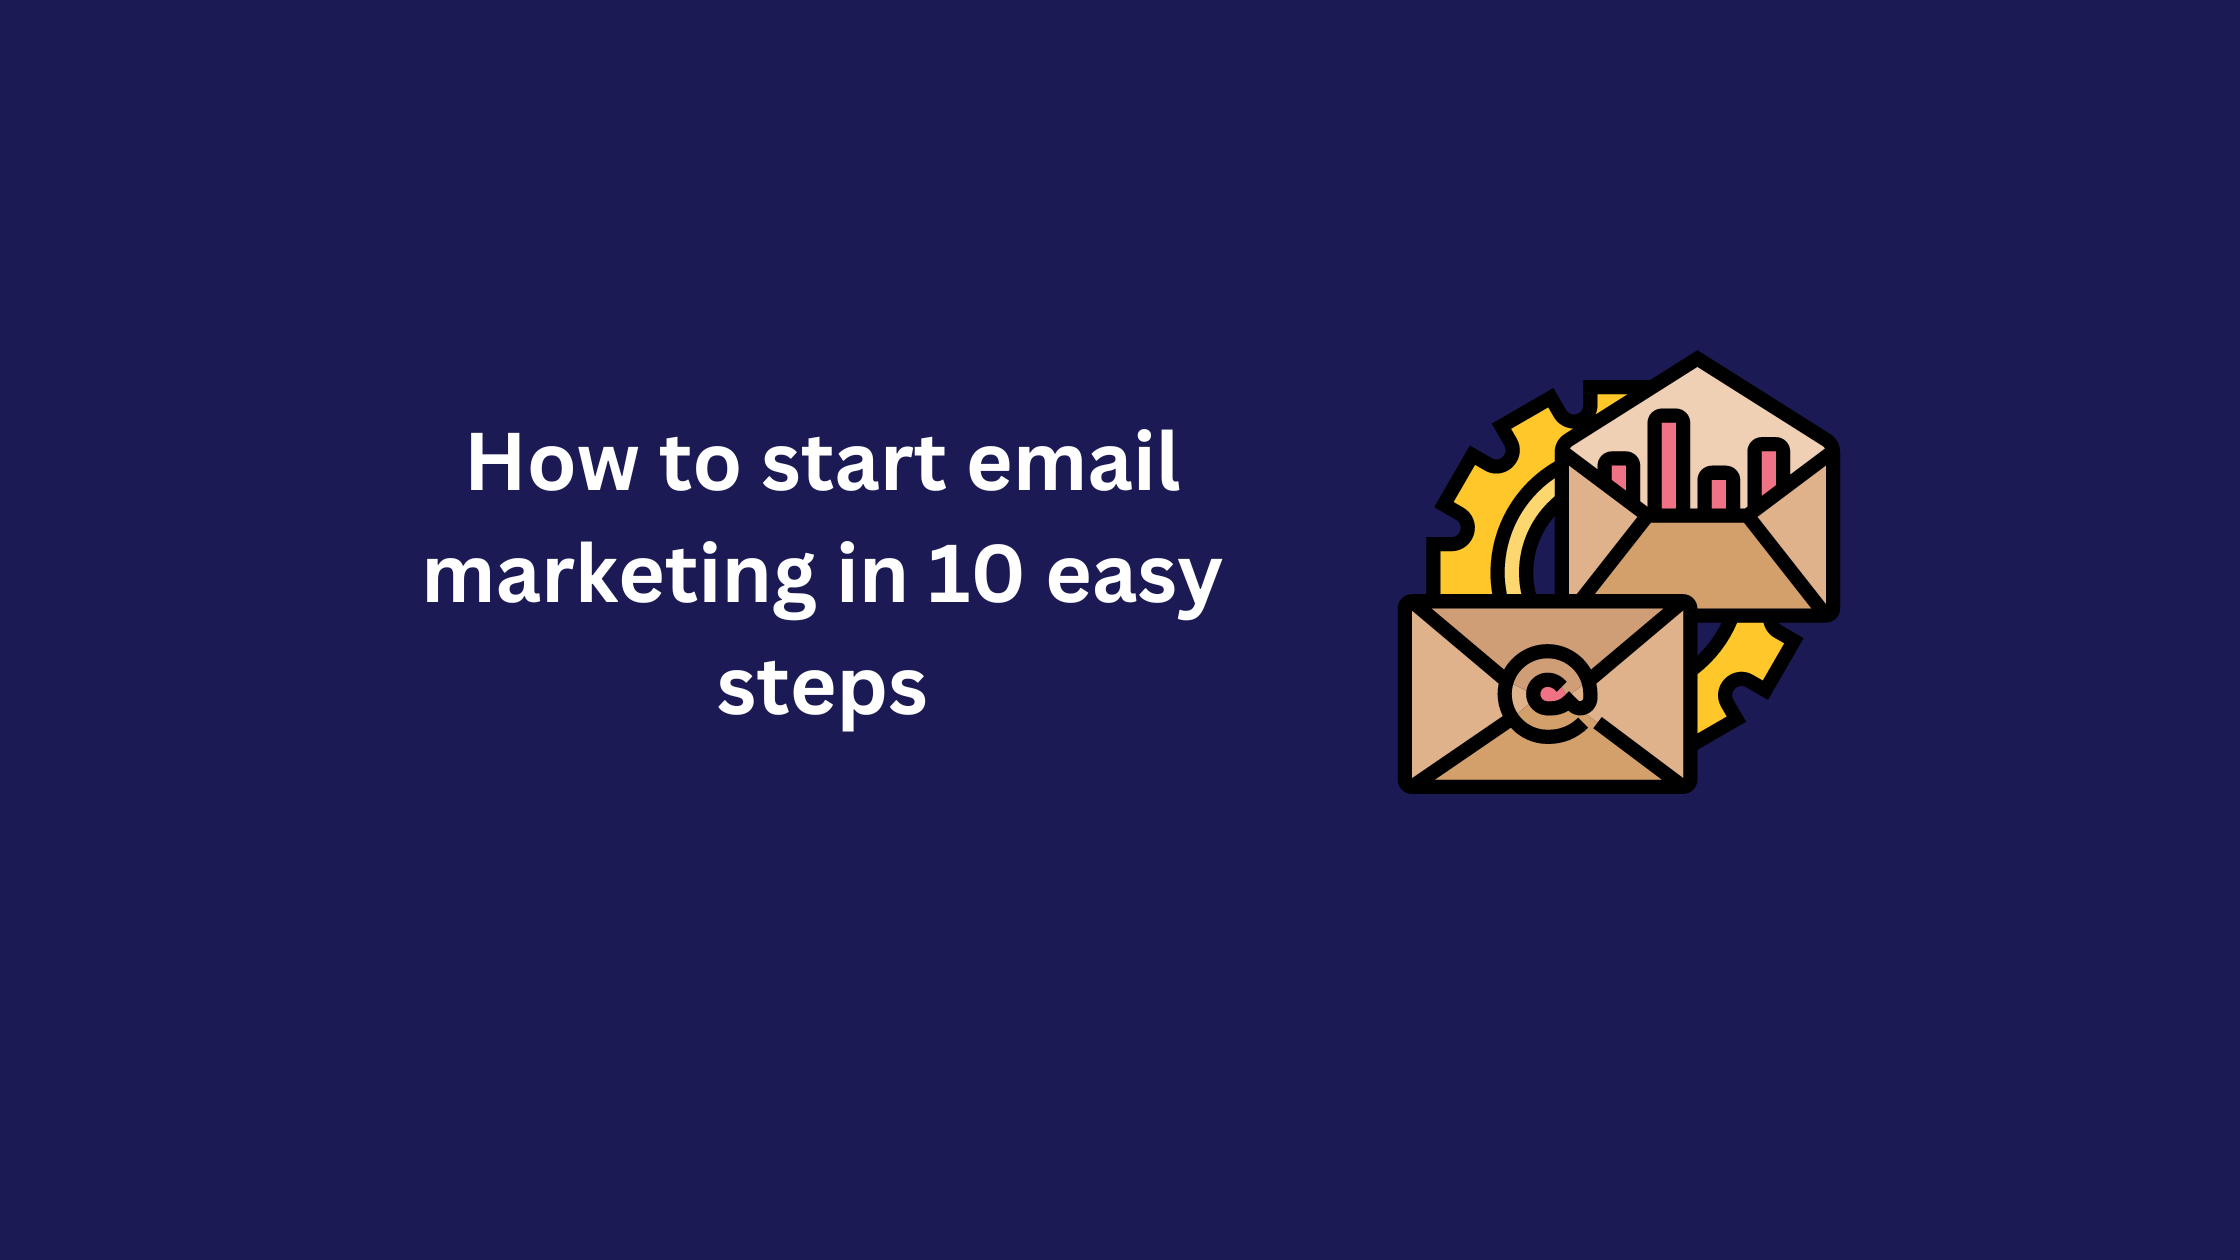 How to start email marketing in 10 easy steps